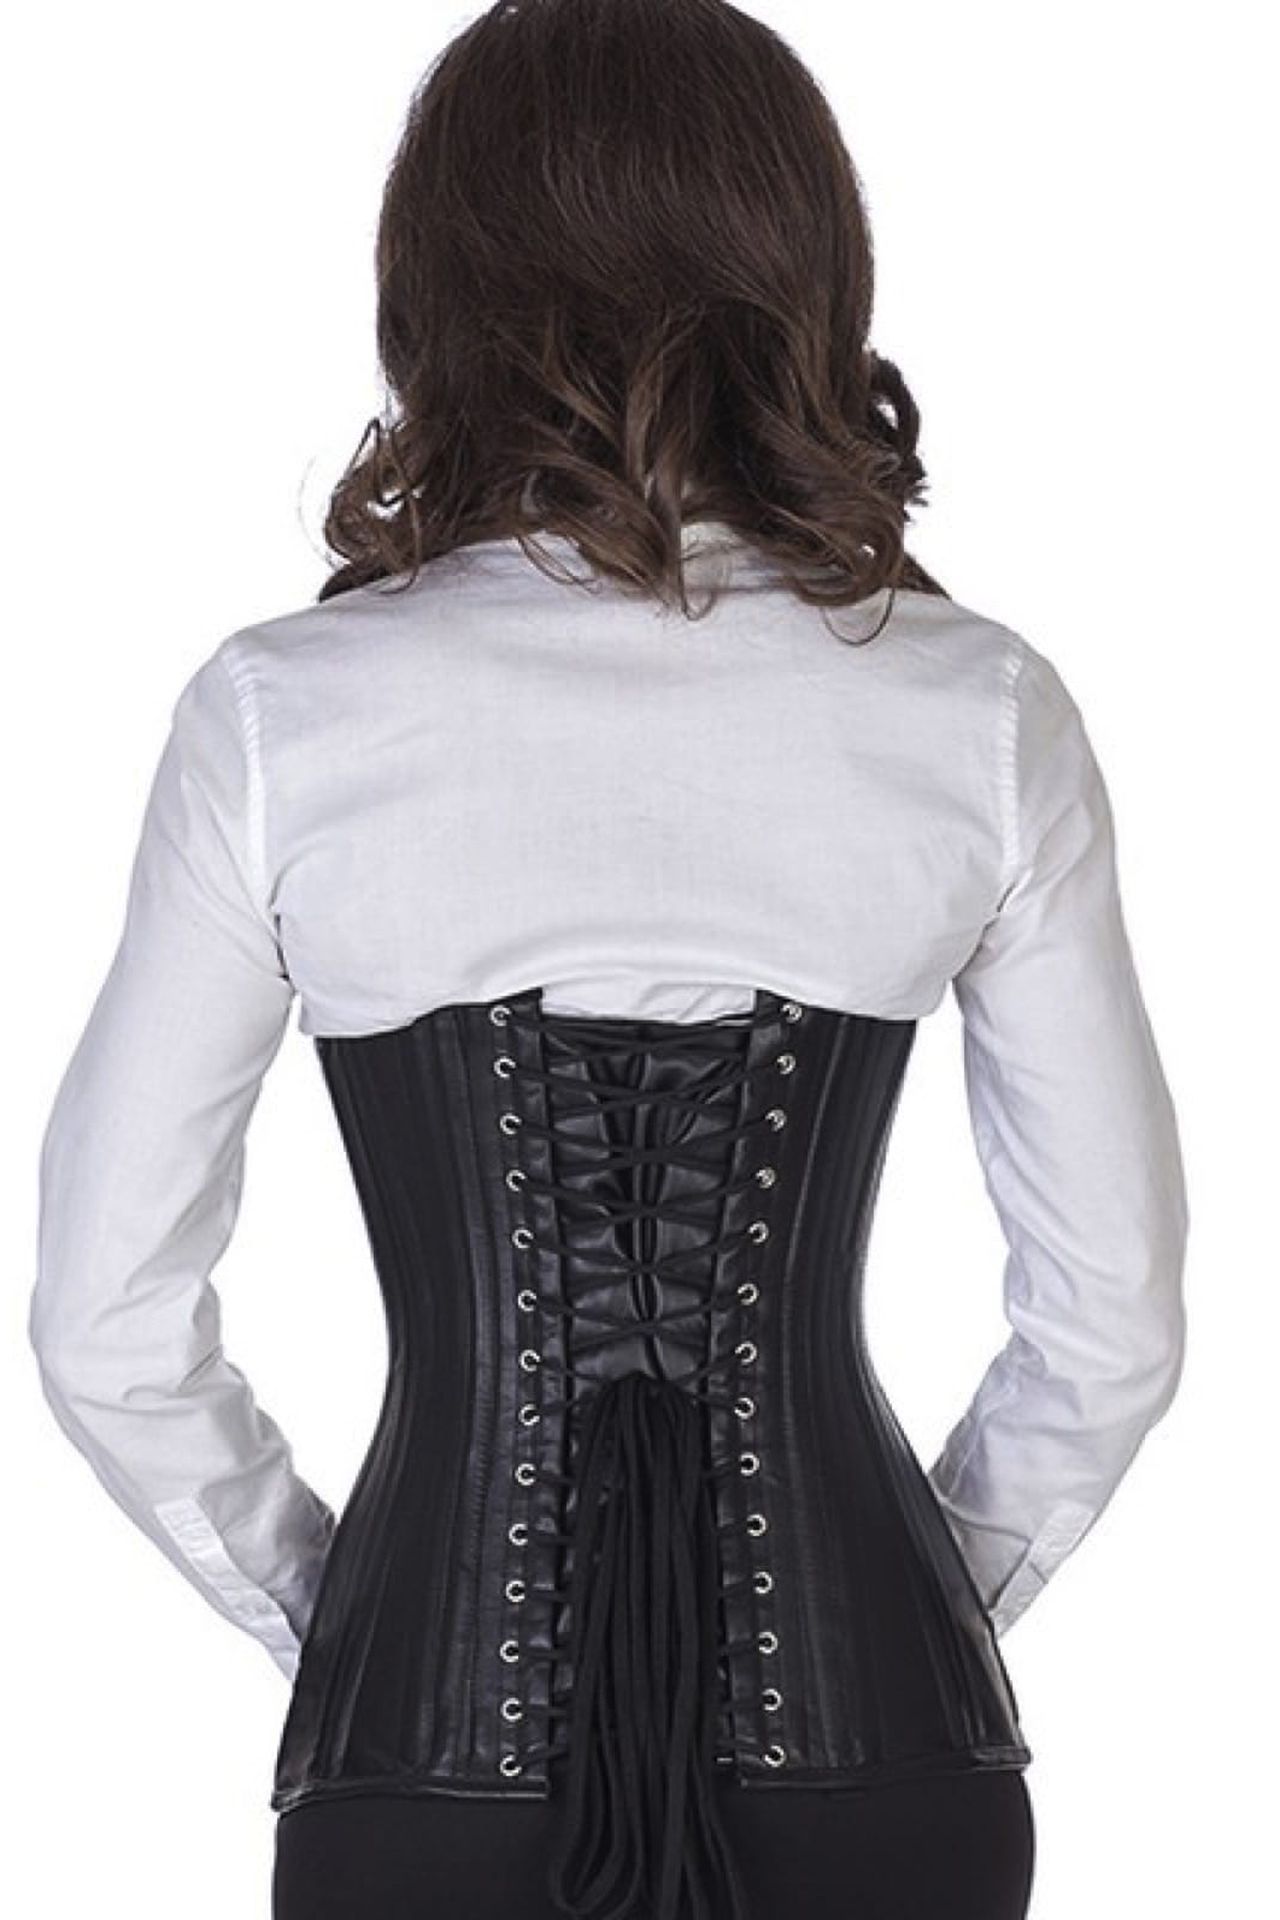 Corset black leather curved underbust ln20